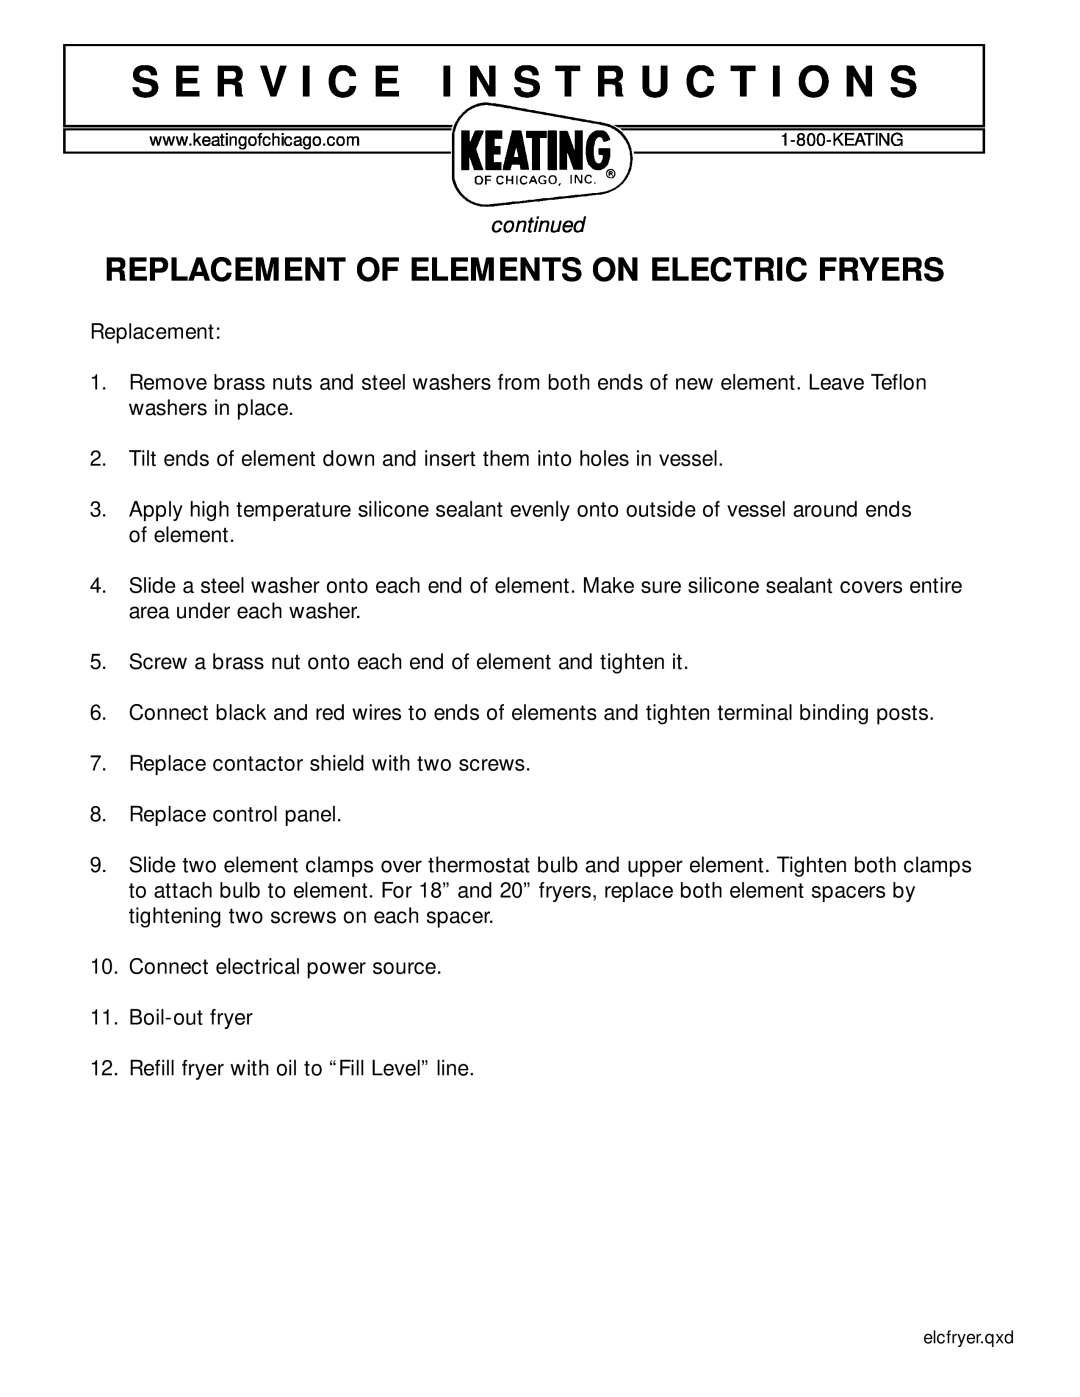 Keating Of Chicago manual Replacement Of Elements On Electric Fryers, S E R V I C E I N S T R U C T I O N S, continued 